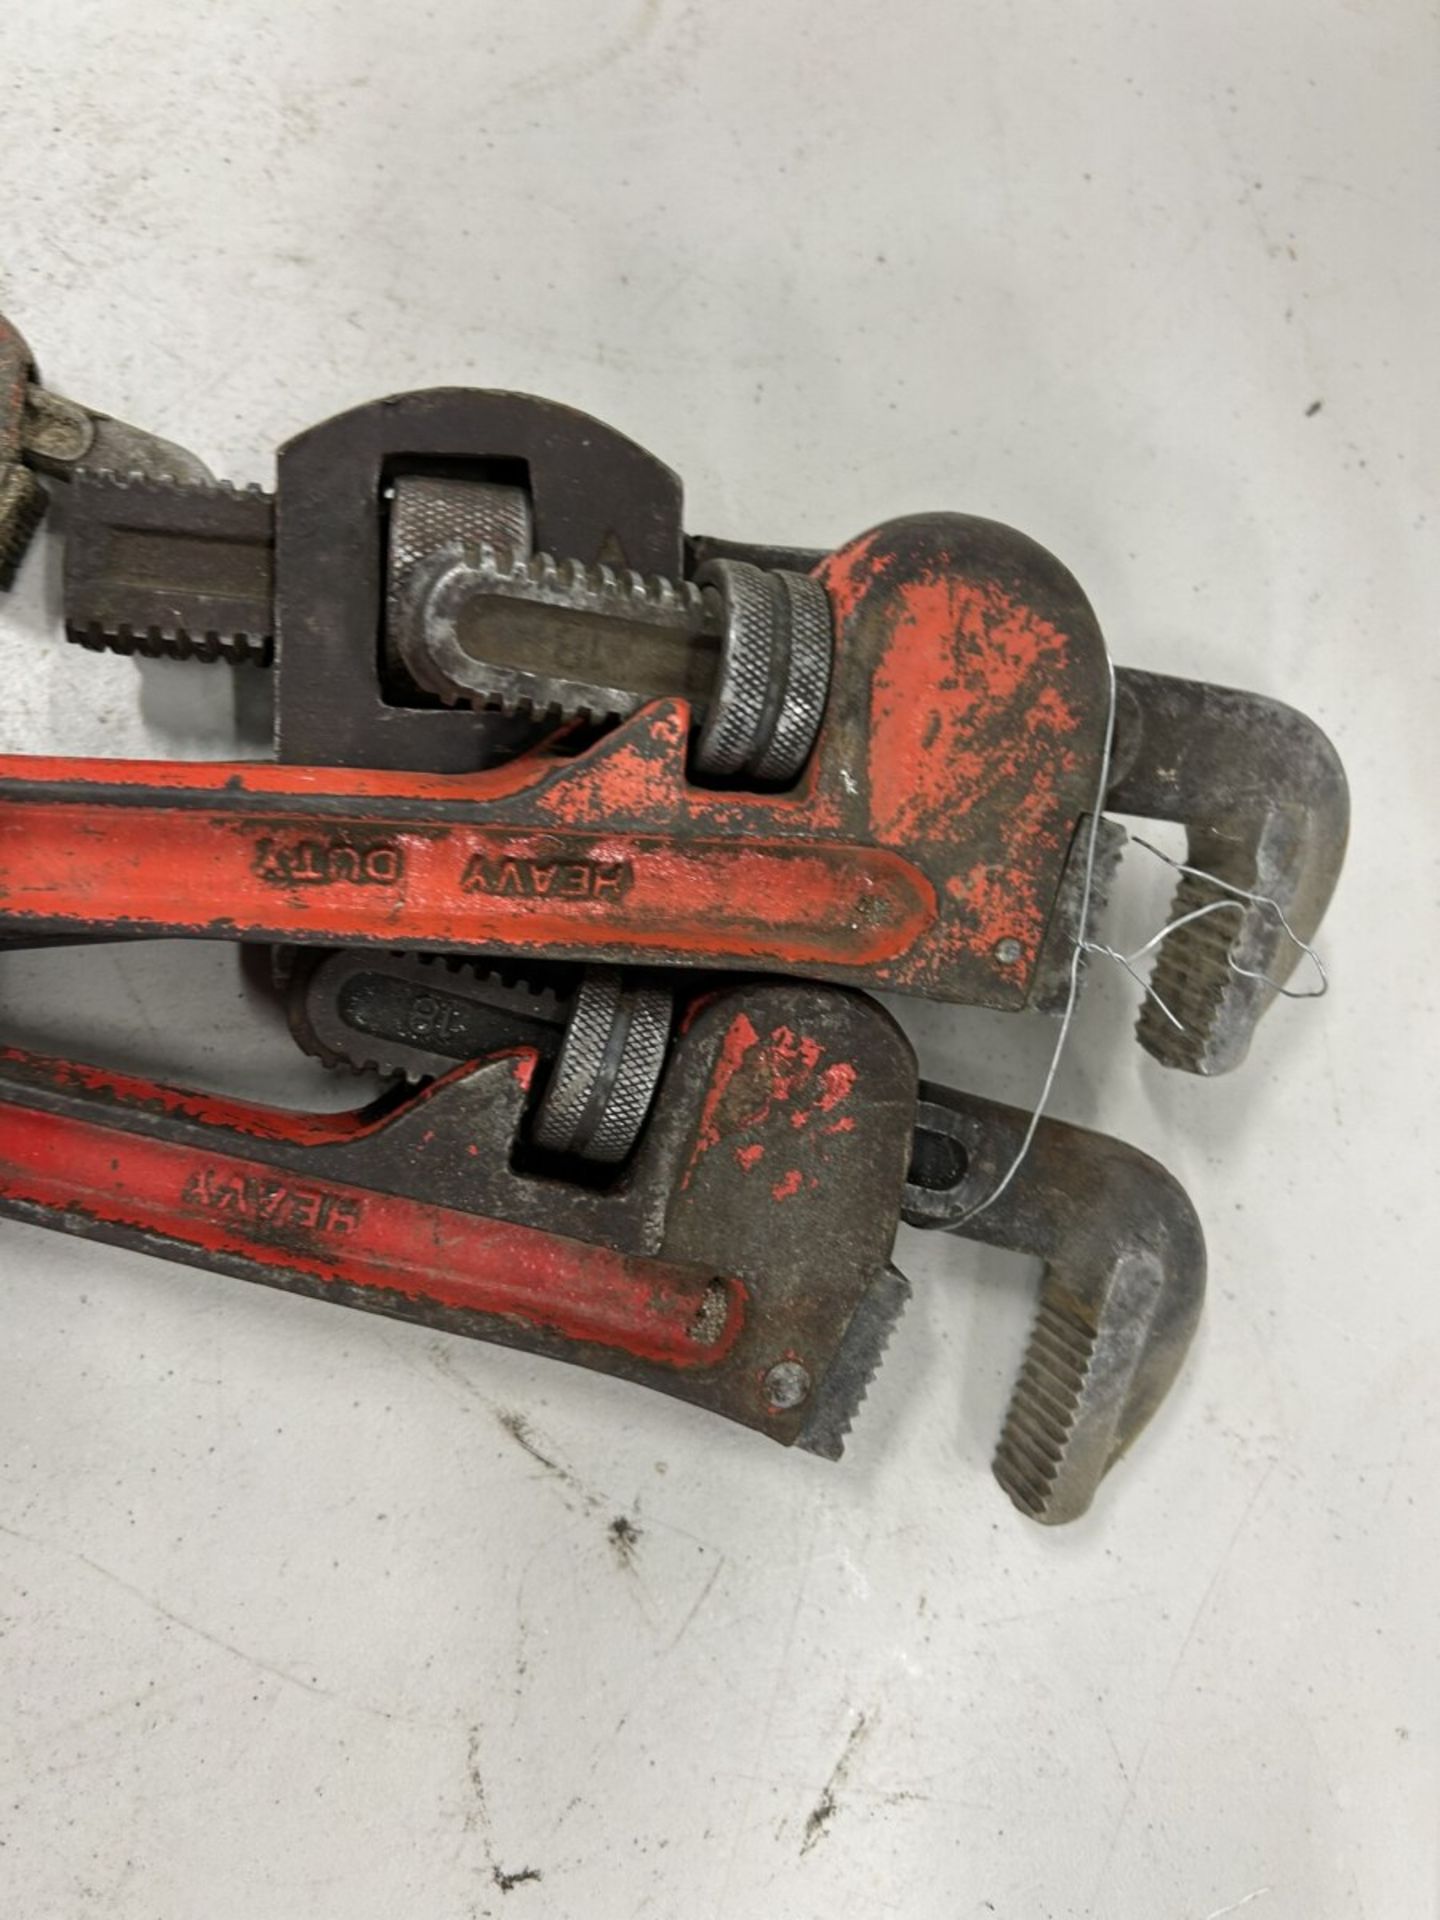 4 ASSORTED HEAVY DUTY PIPE WRENCHES - Image 2 of 3